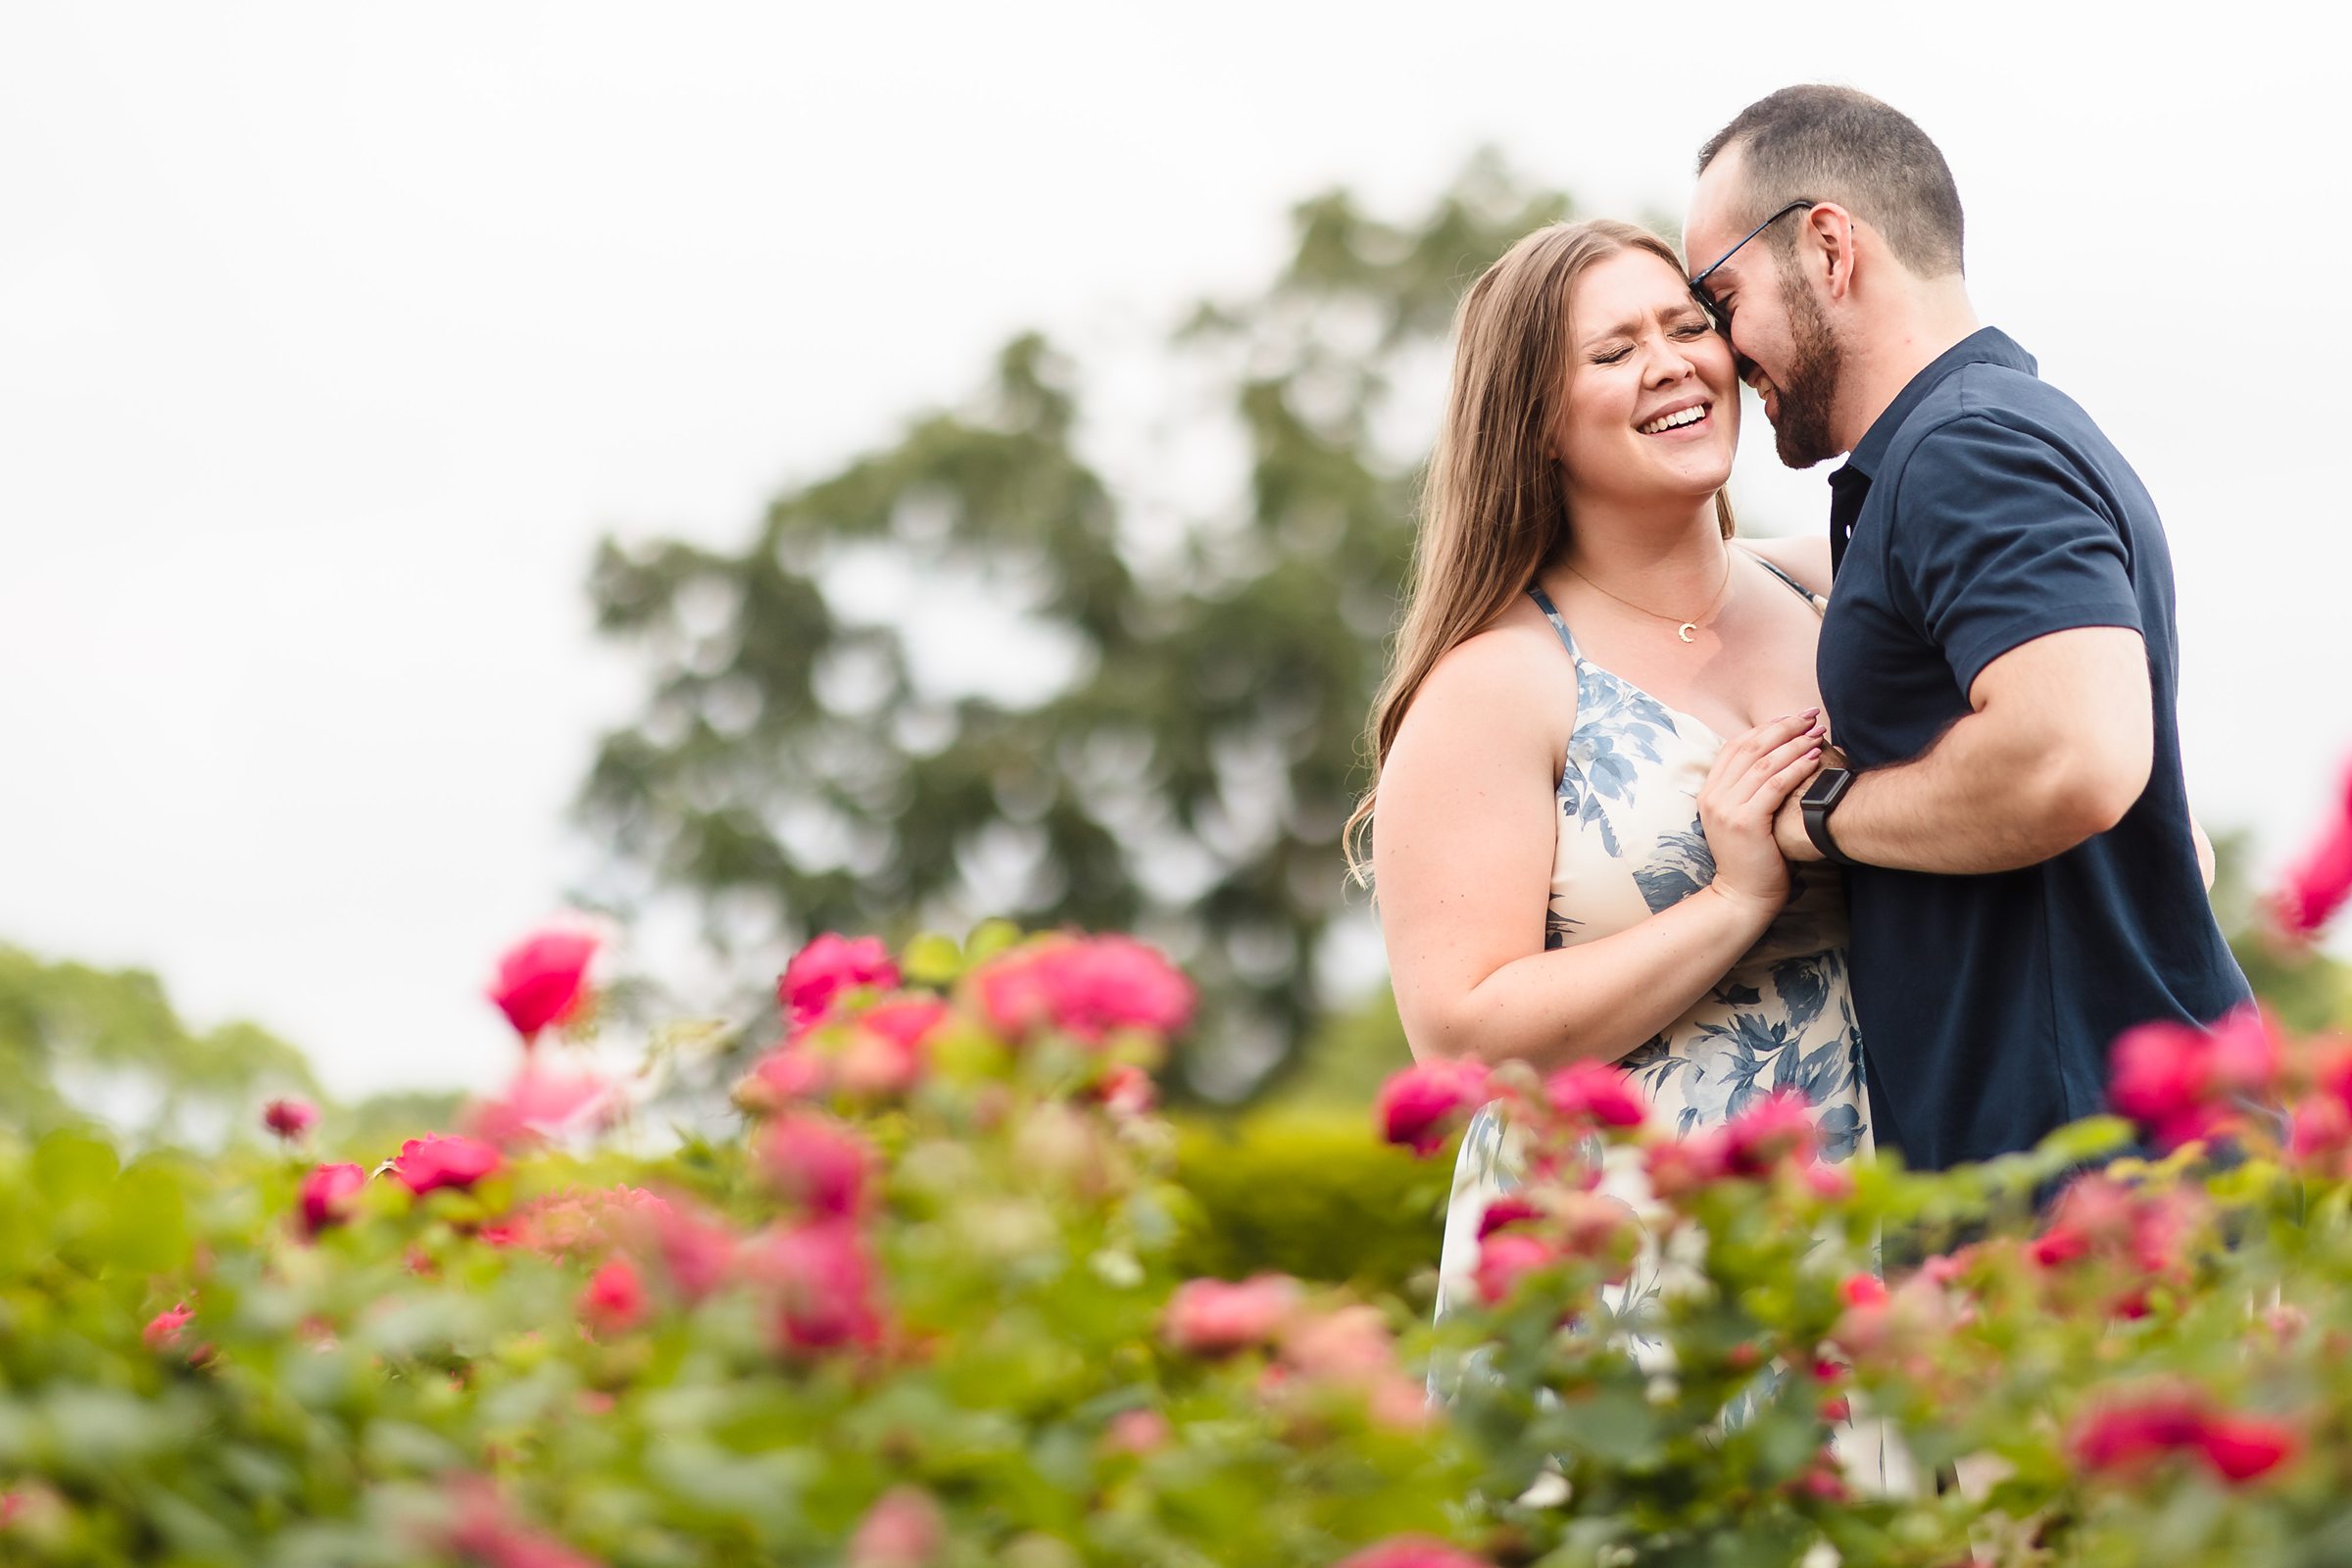 Couple embrace during their engagement session at Cantigny Park in Wheaton, Illinois.